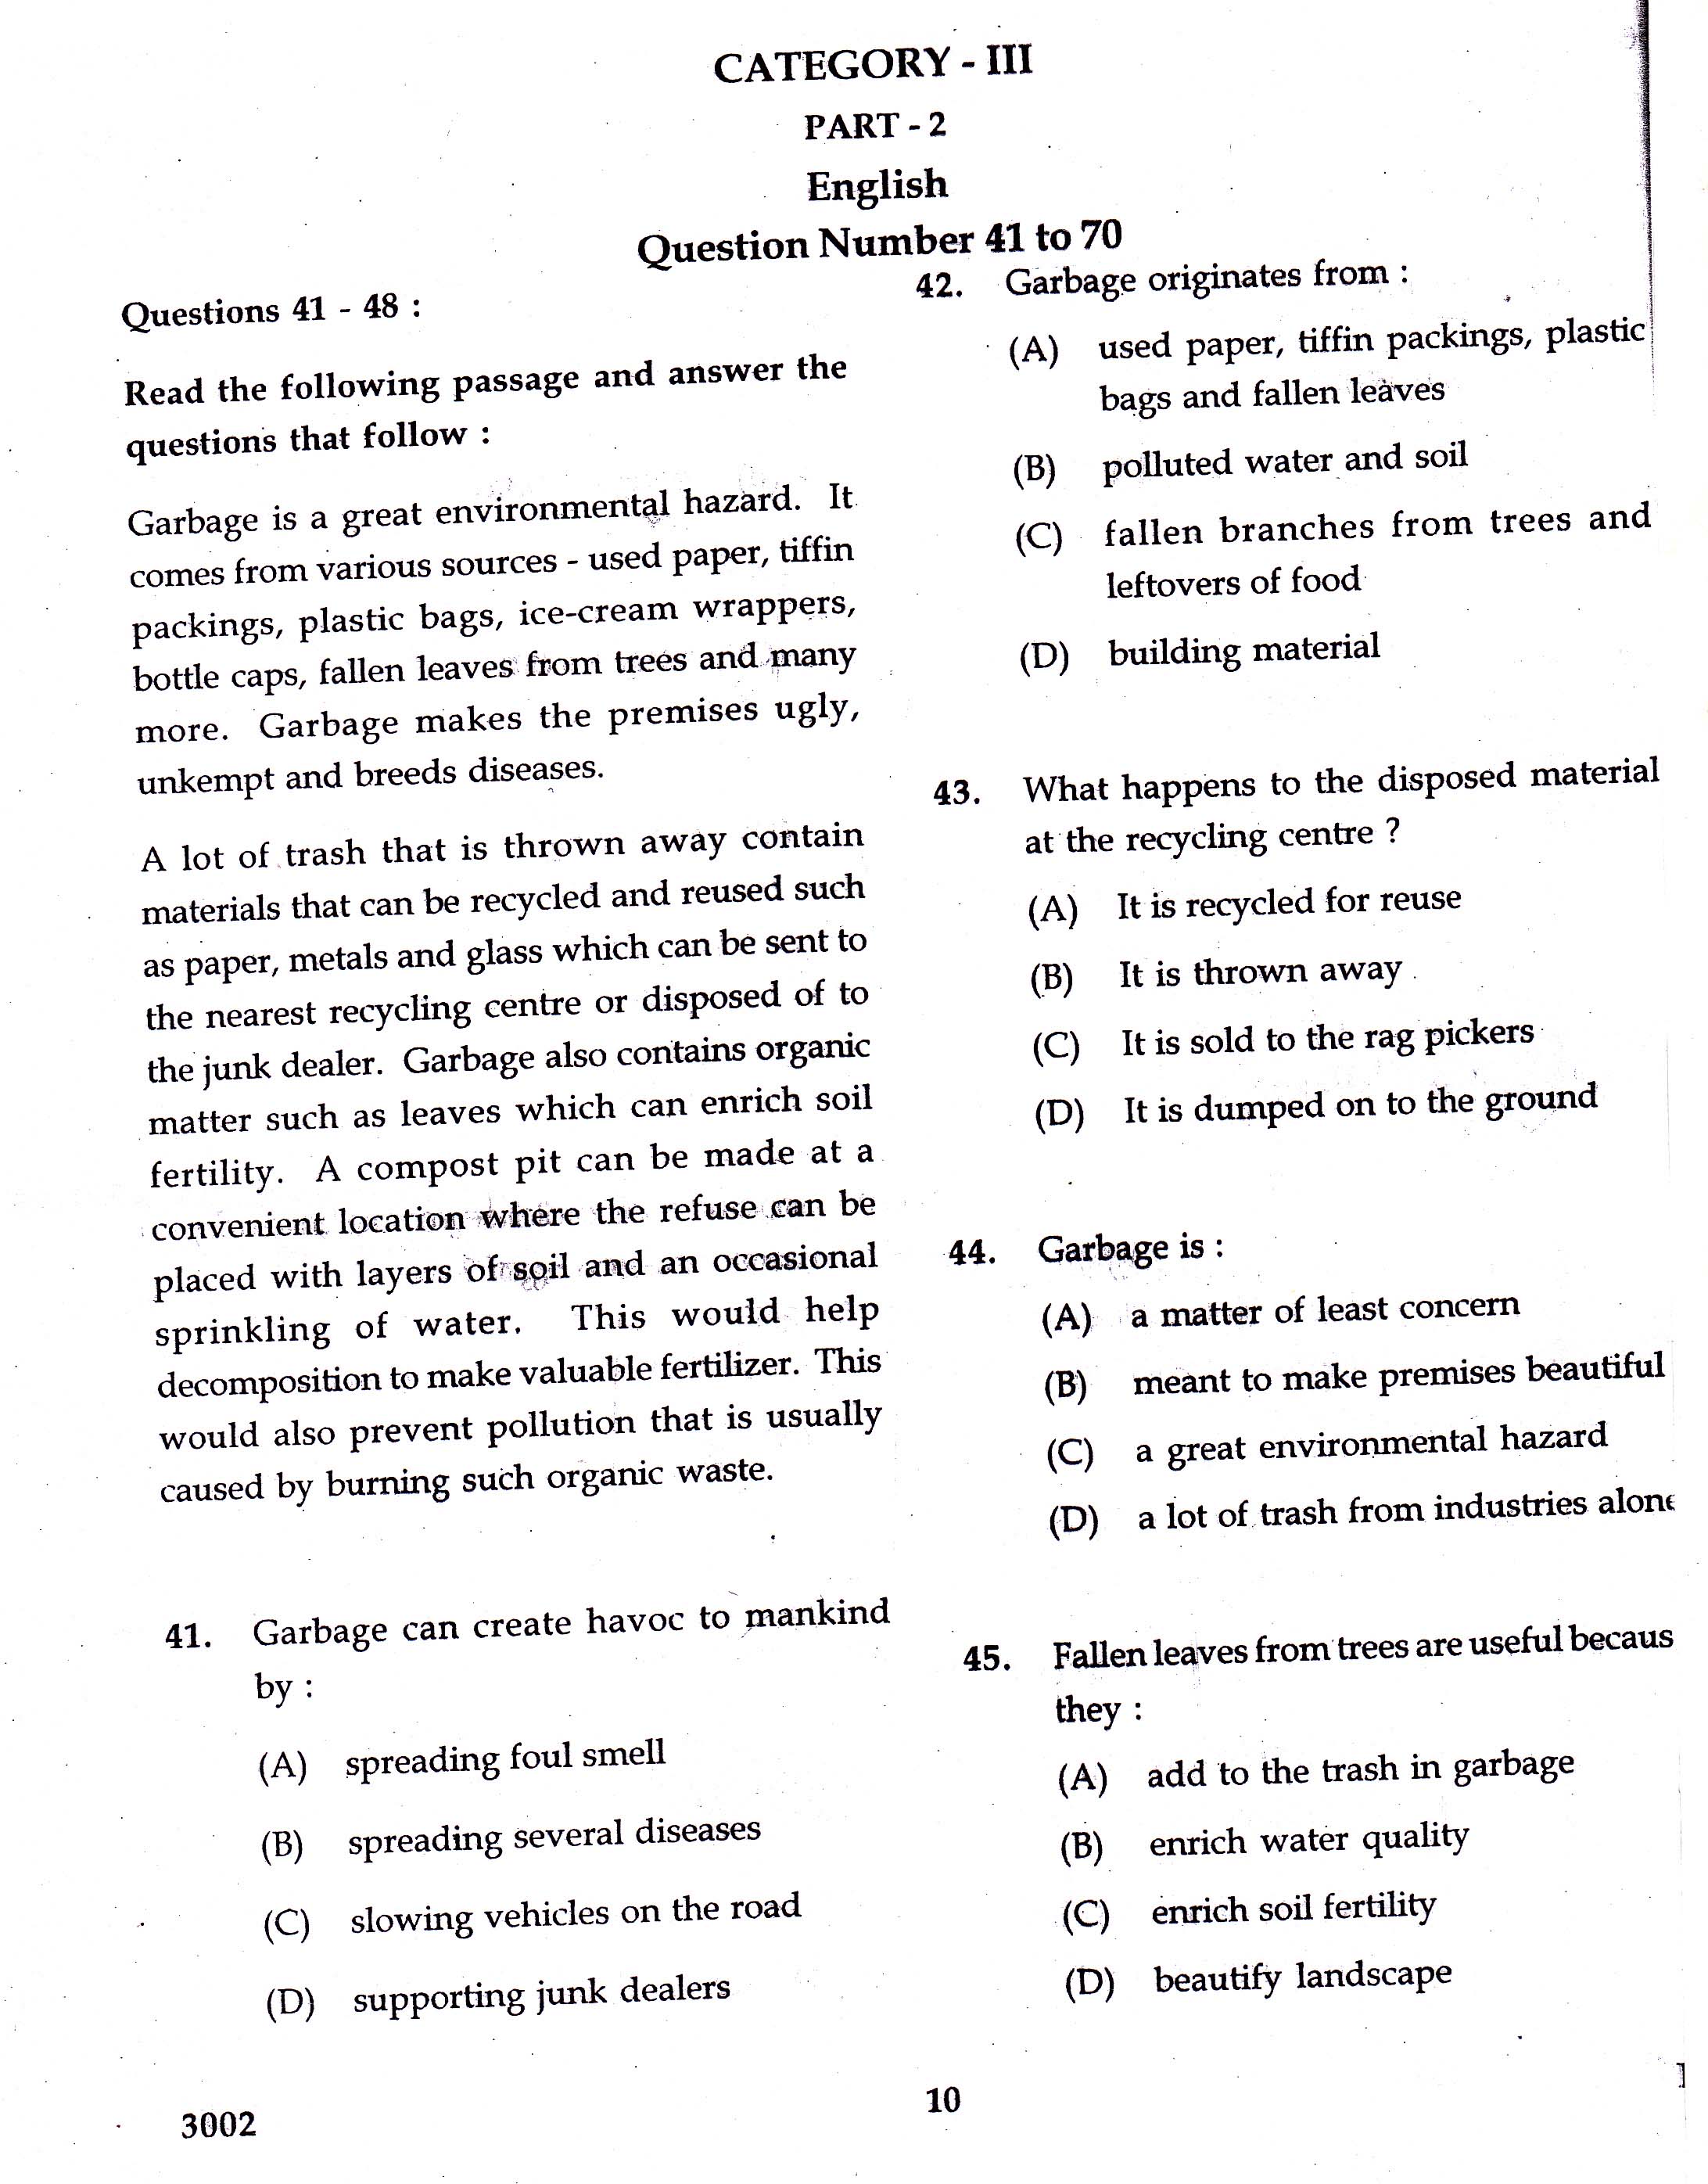 KTET Category III Part 2 English Question Paper with Answers 2017 1